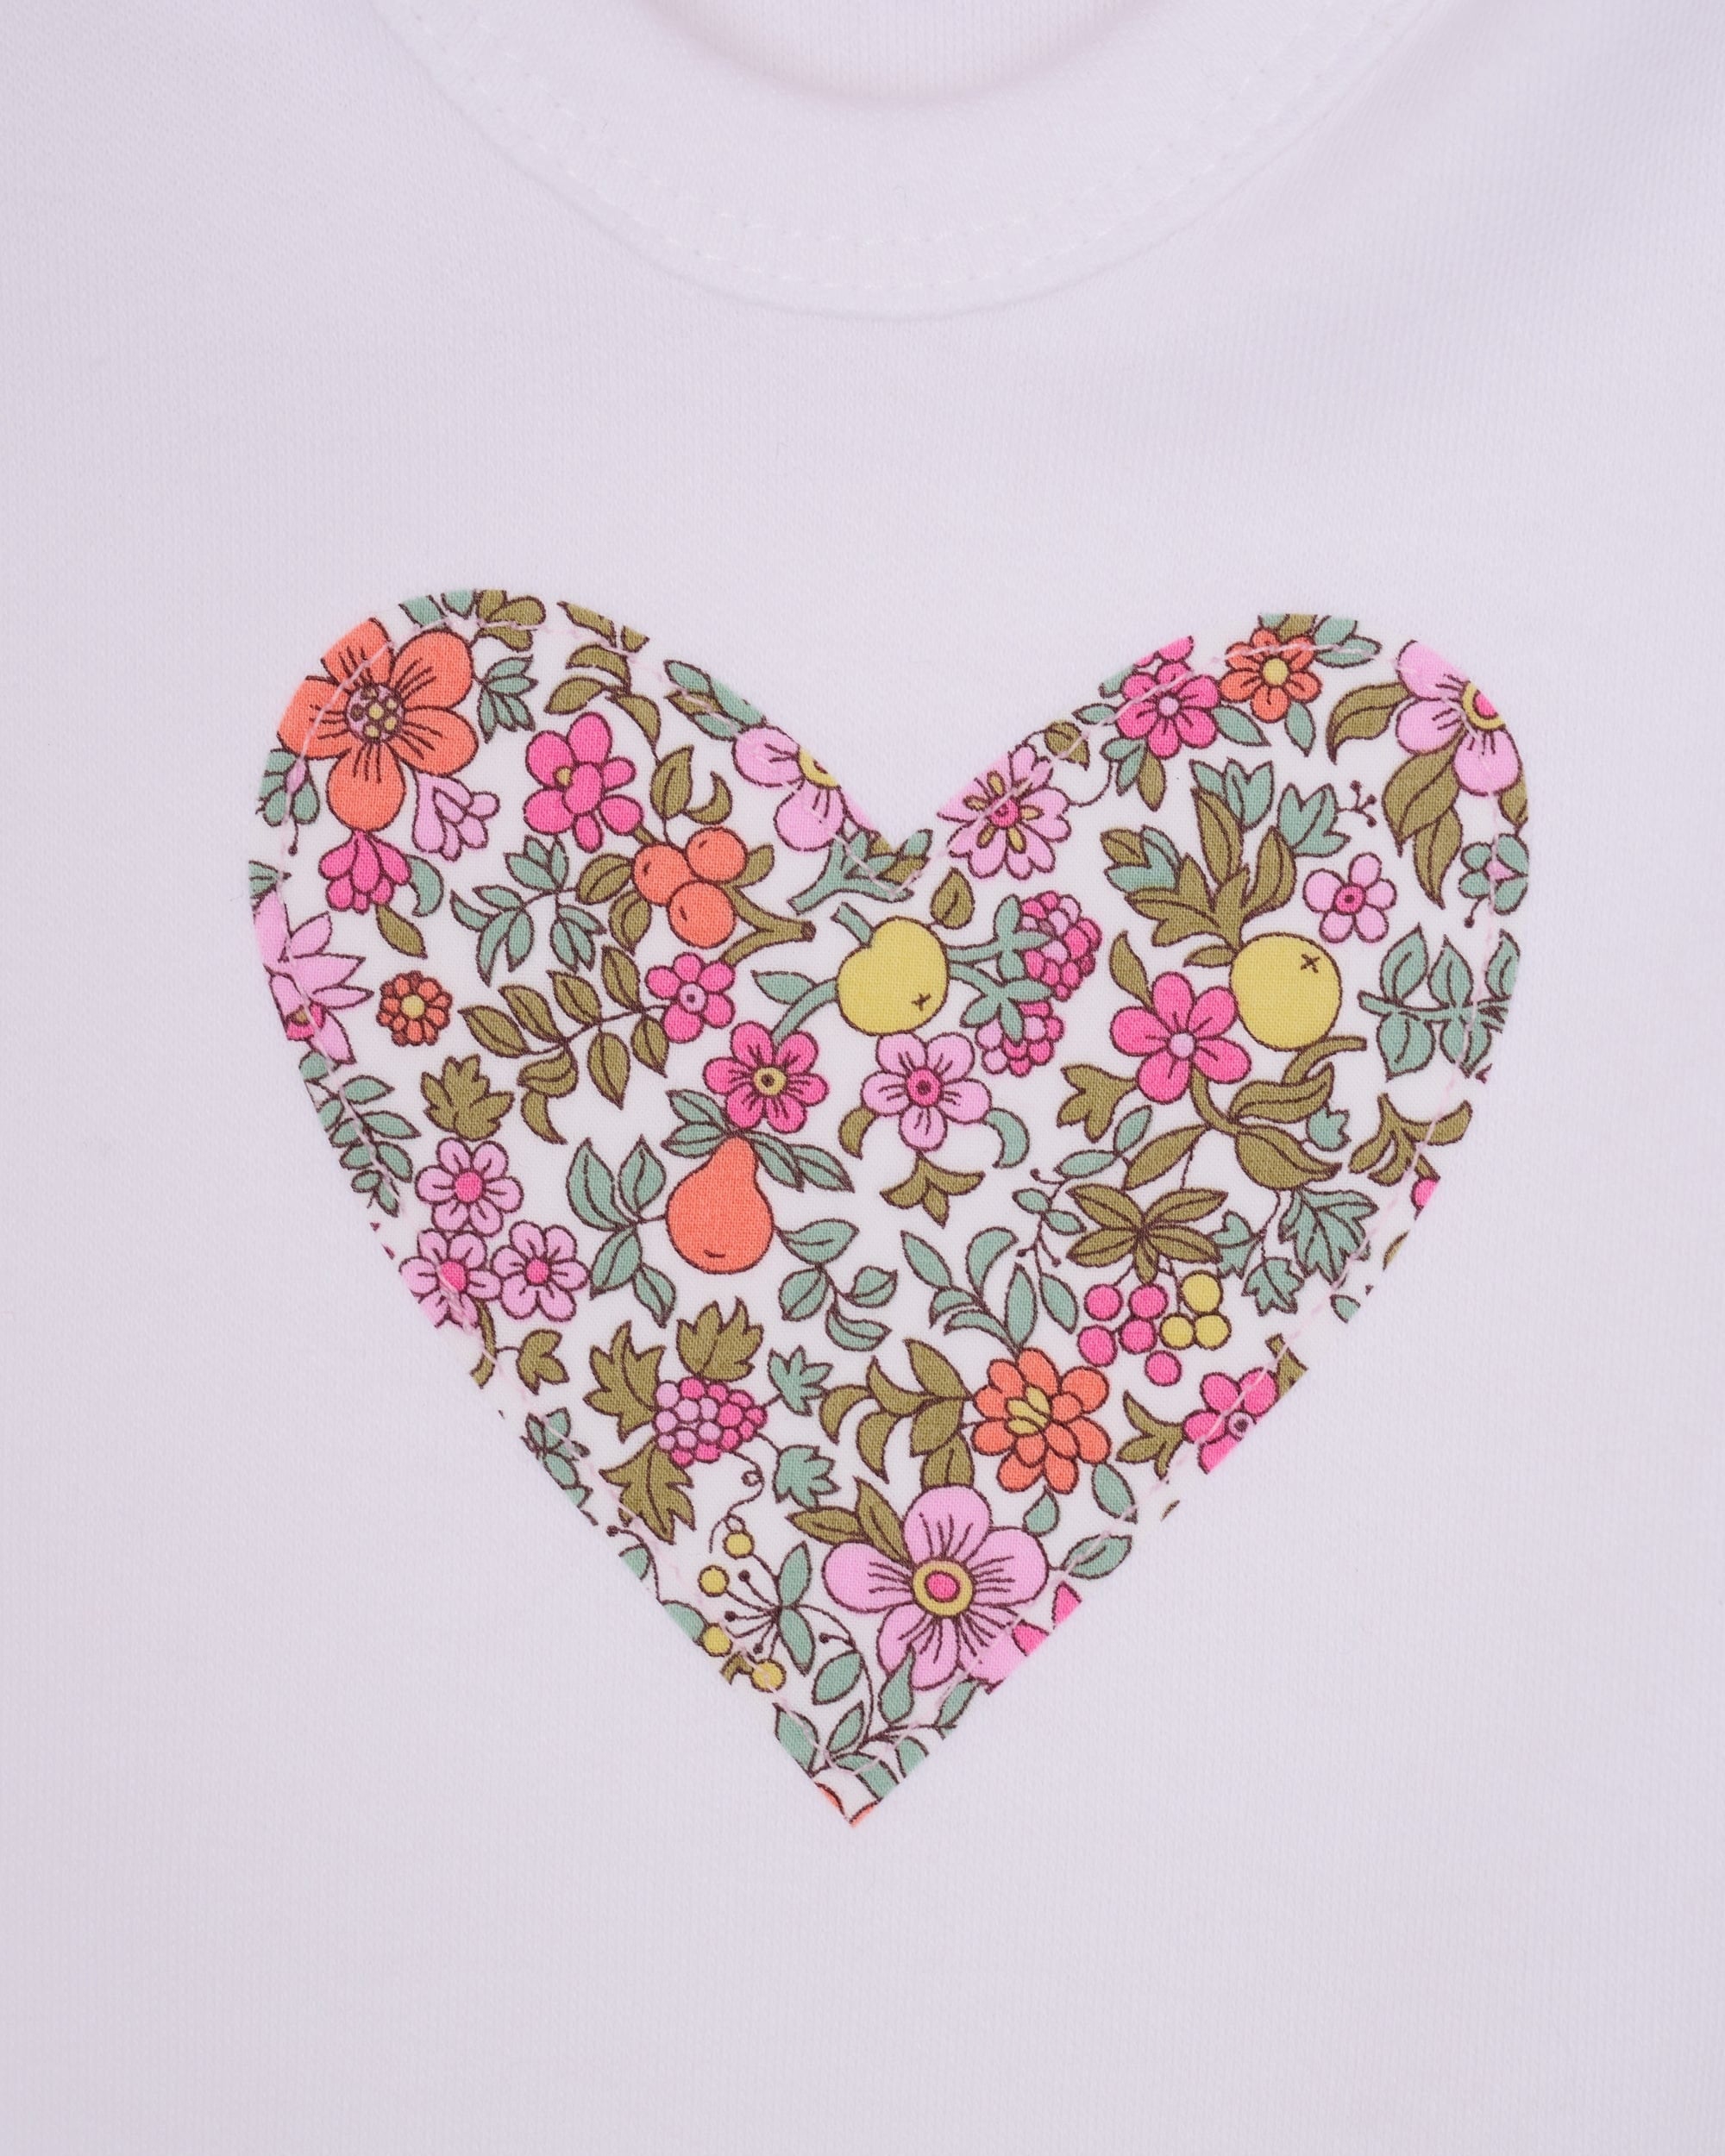 Magnificent Stanley Bodysuit Heart Cotton Bodysuit in choice of Liberty Print